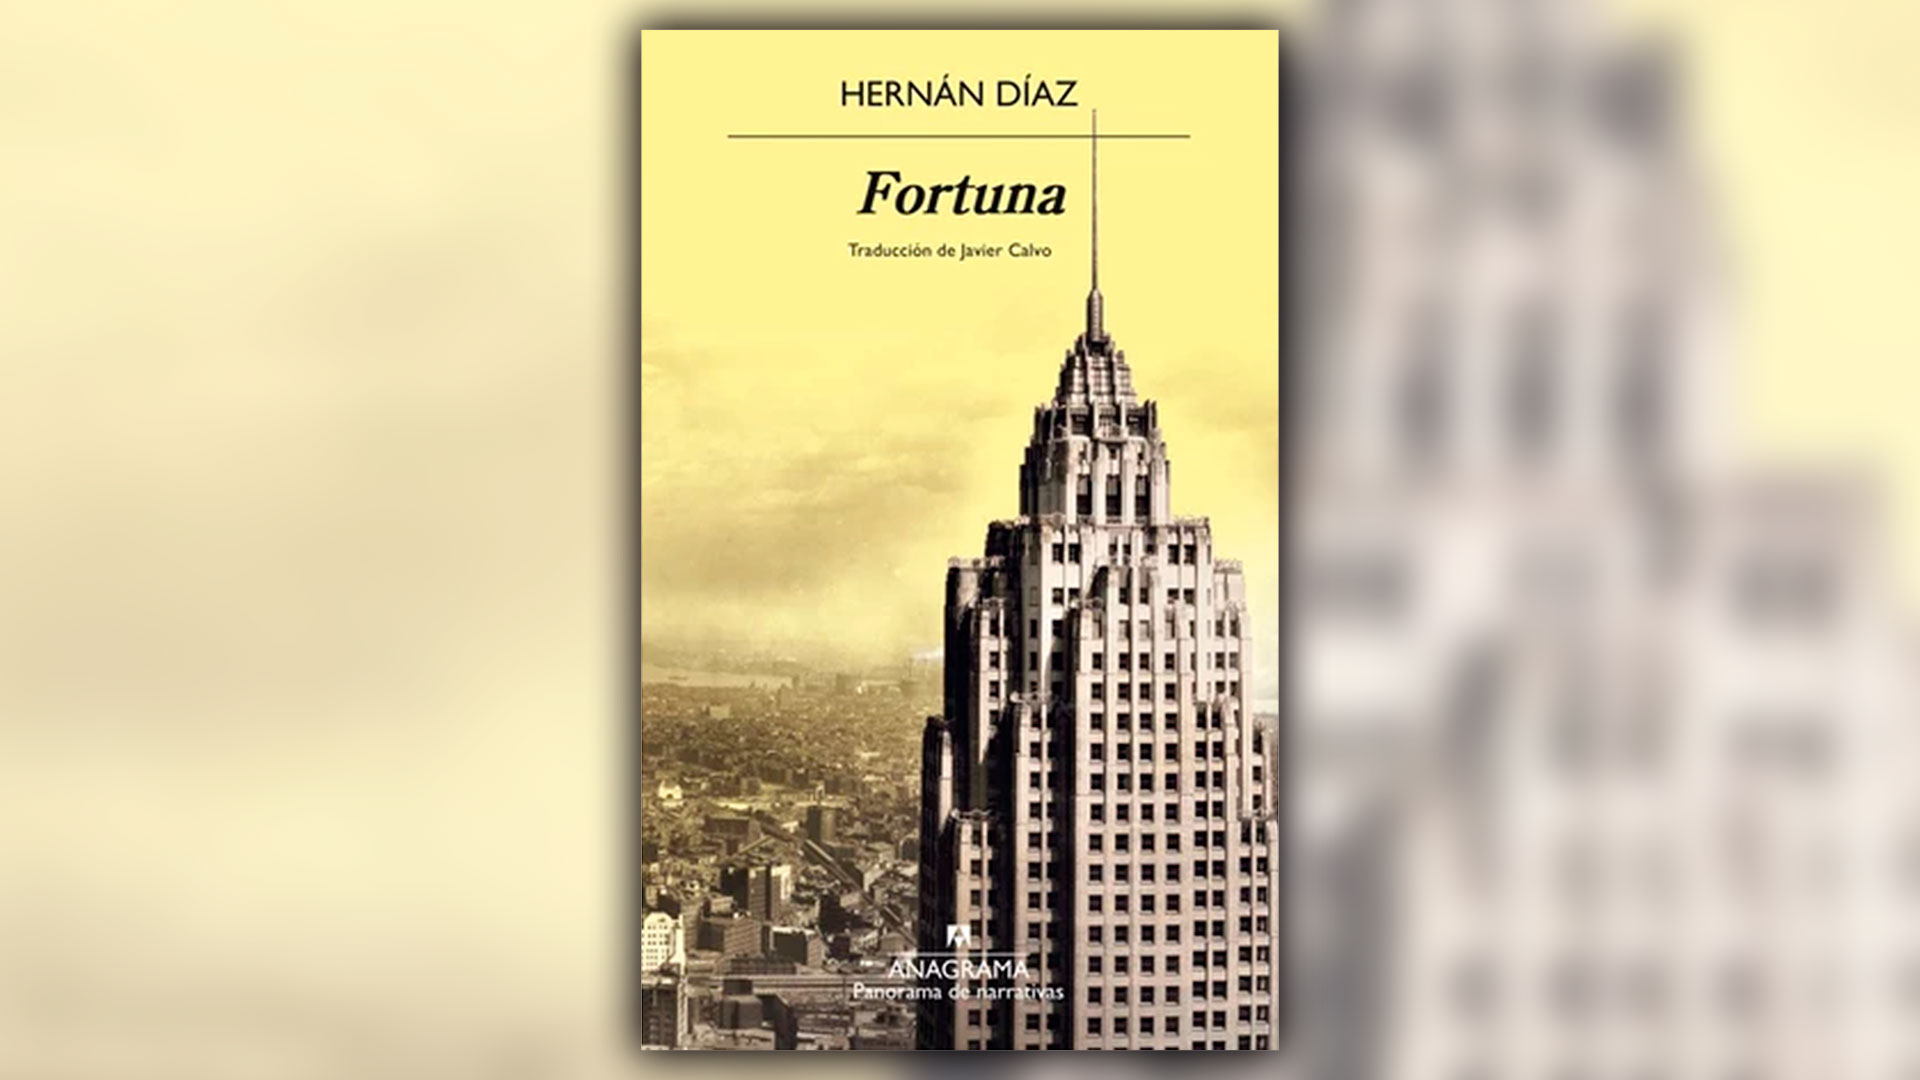 Díaz worked for five years on his second and award-winning novel "Fortuna"which was published by Anagrama in Spanish.